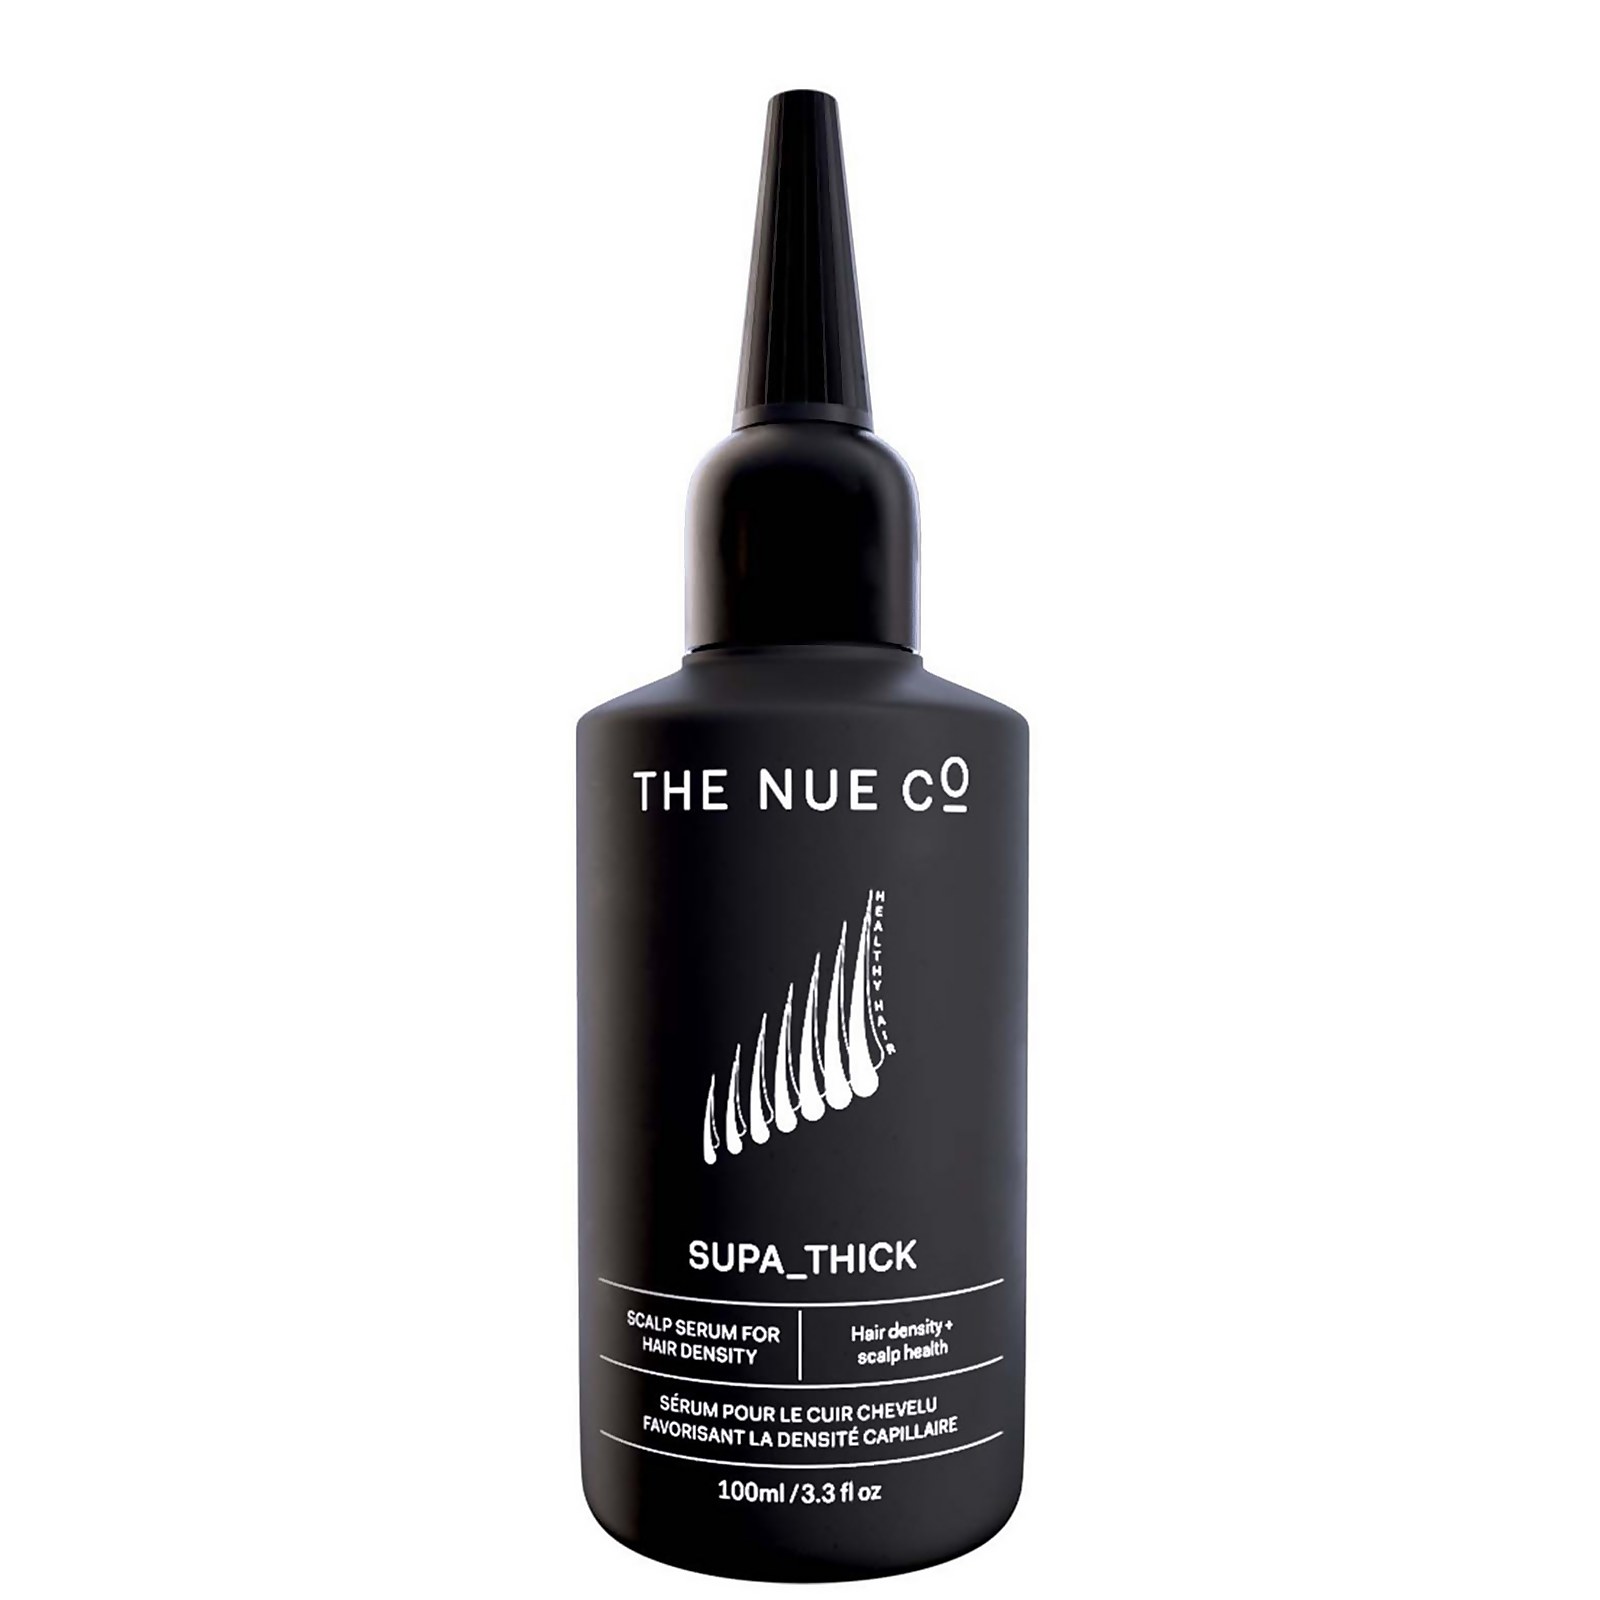 The Nue Co Supa Thick Treatment 100ml